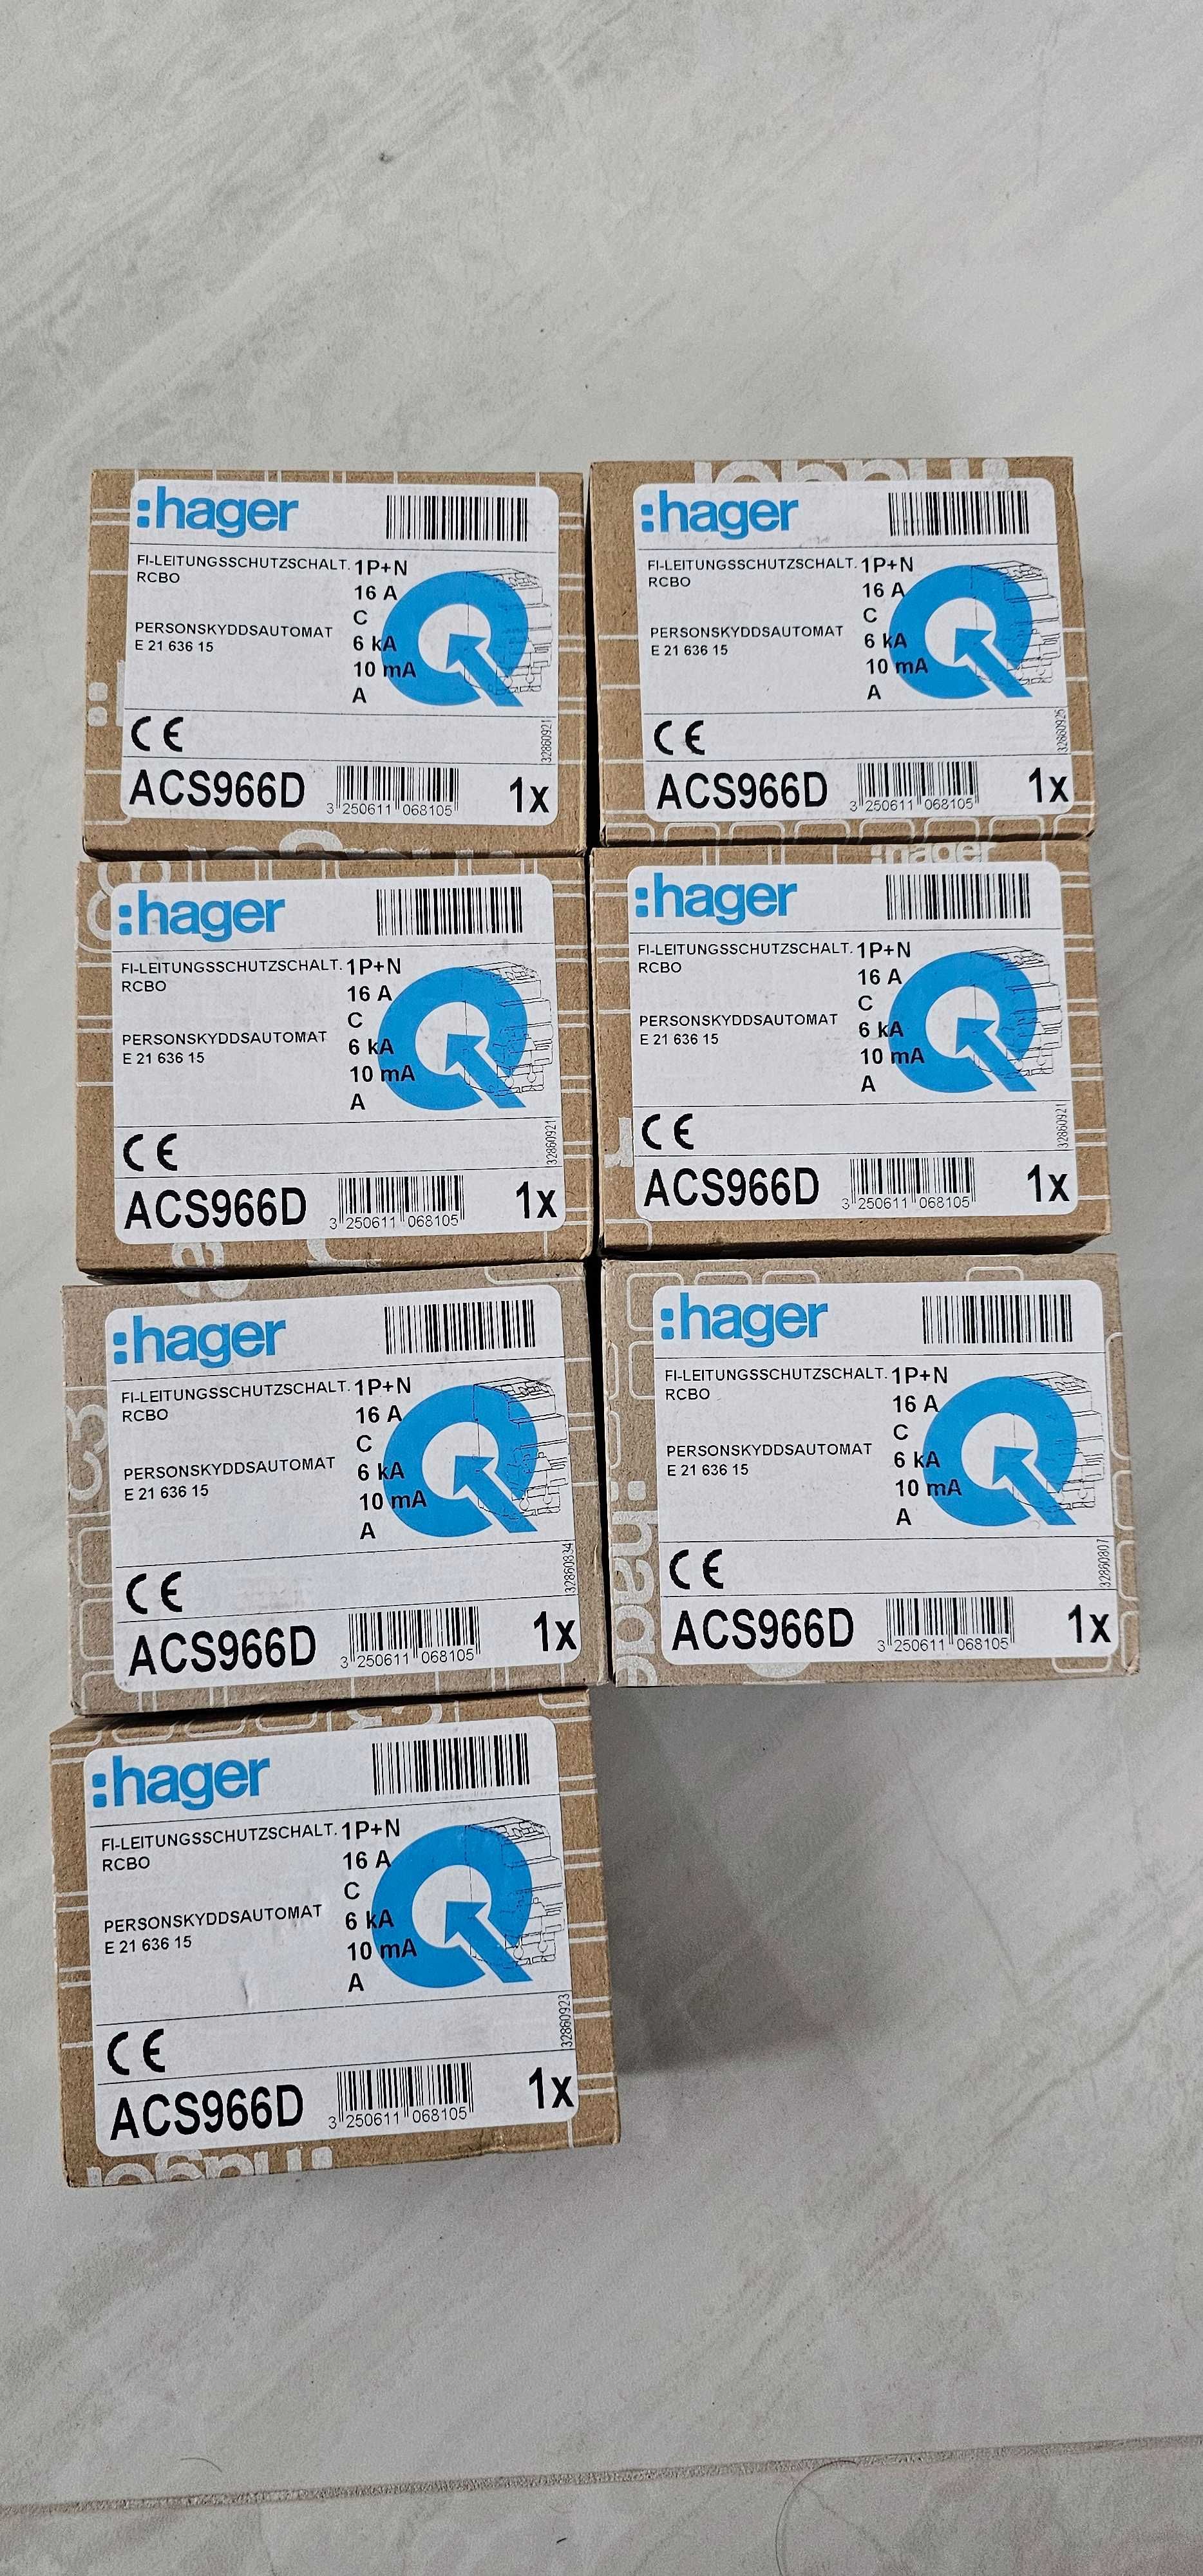 Rcbo hager quick connect 10ma